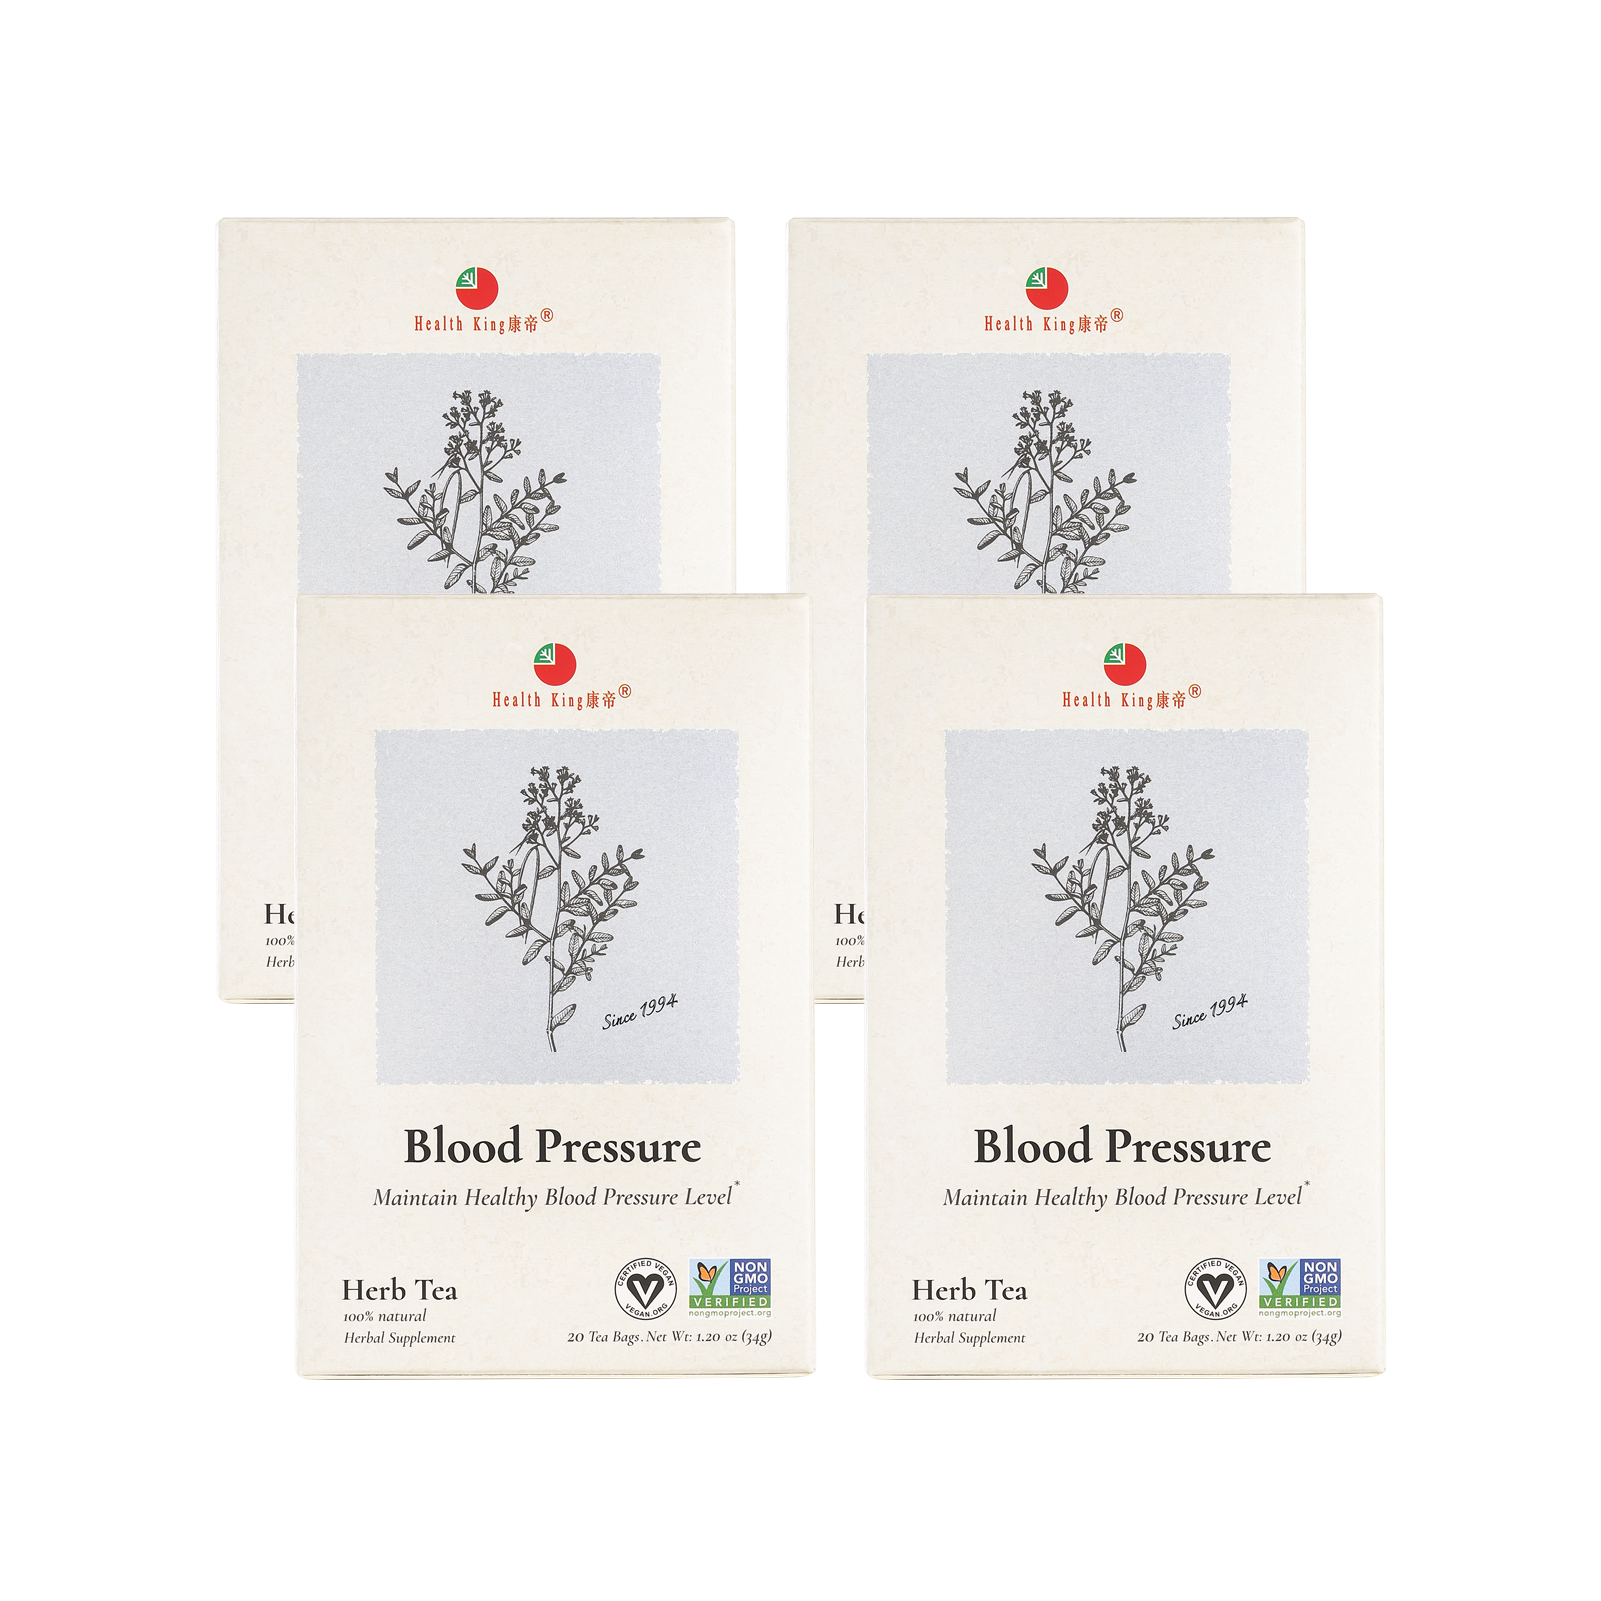 Four of herbal tea boxes for blood pressure support against a white backdrop